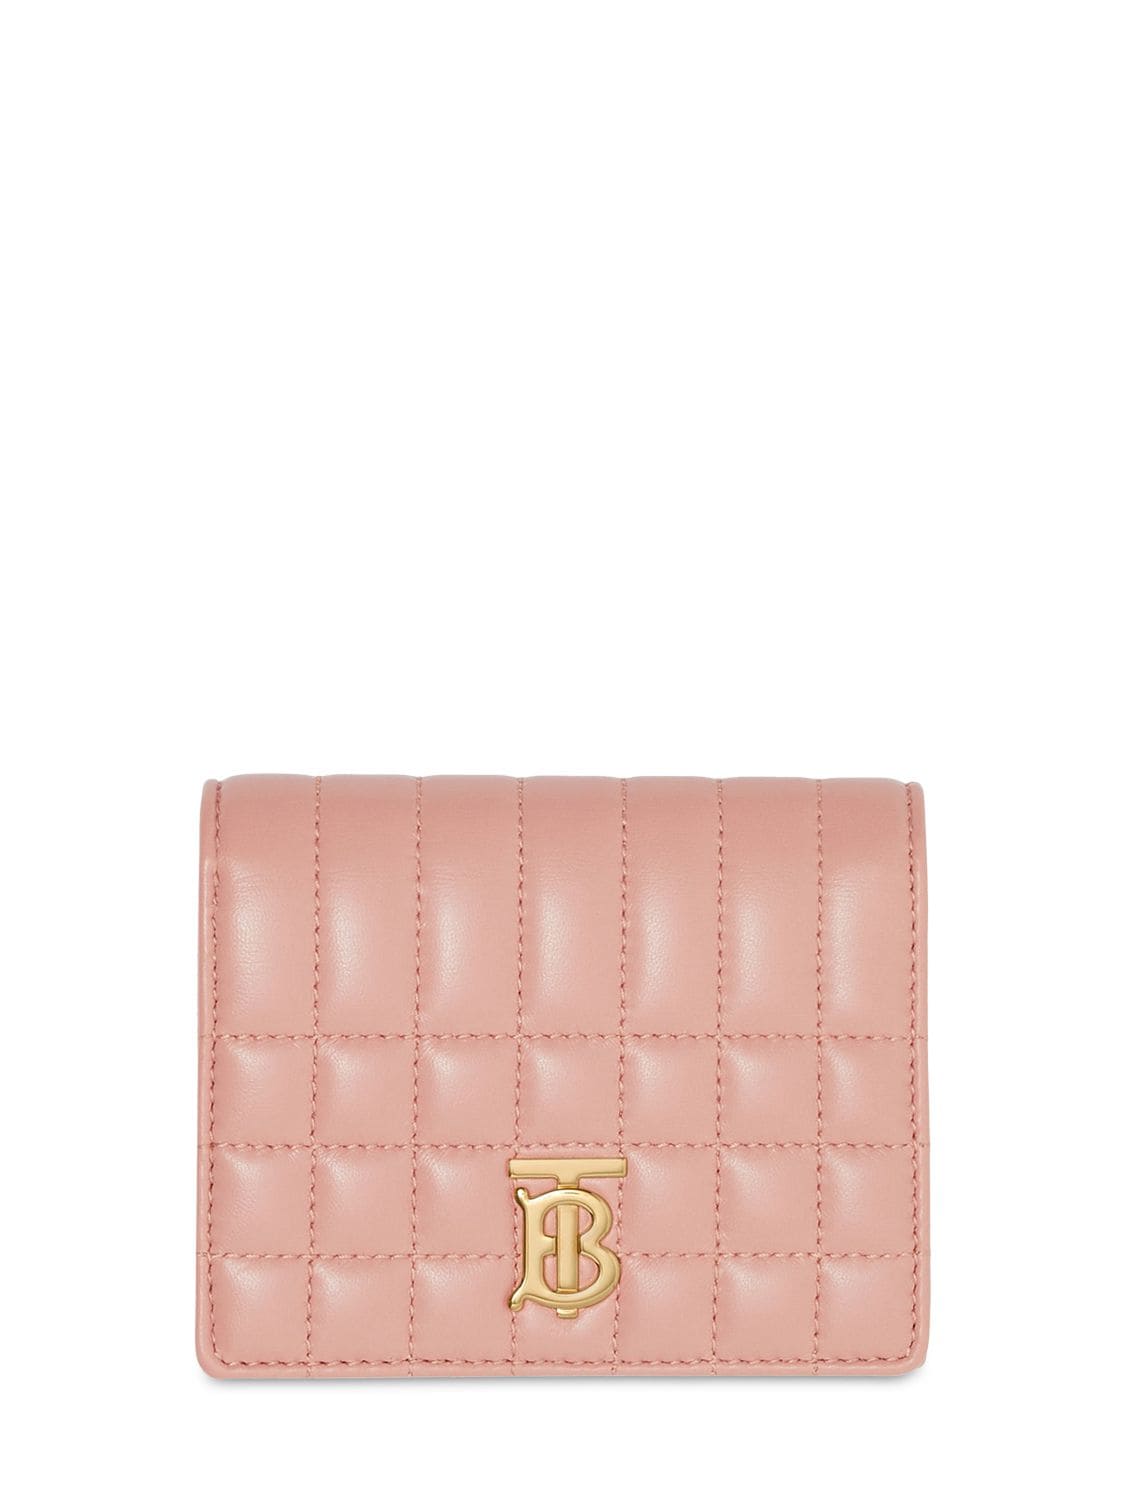 BURBERRY Lola Quilted Leather Wallet